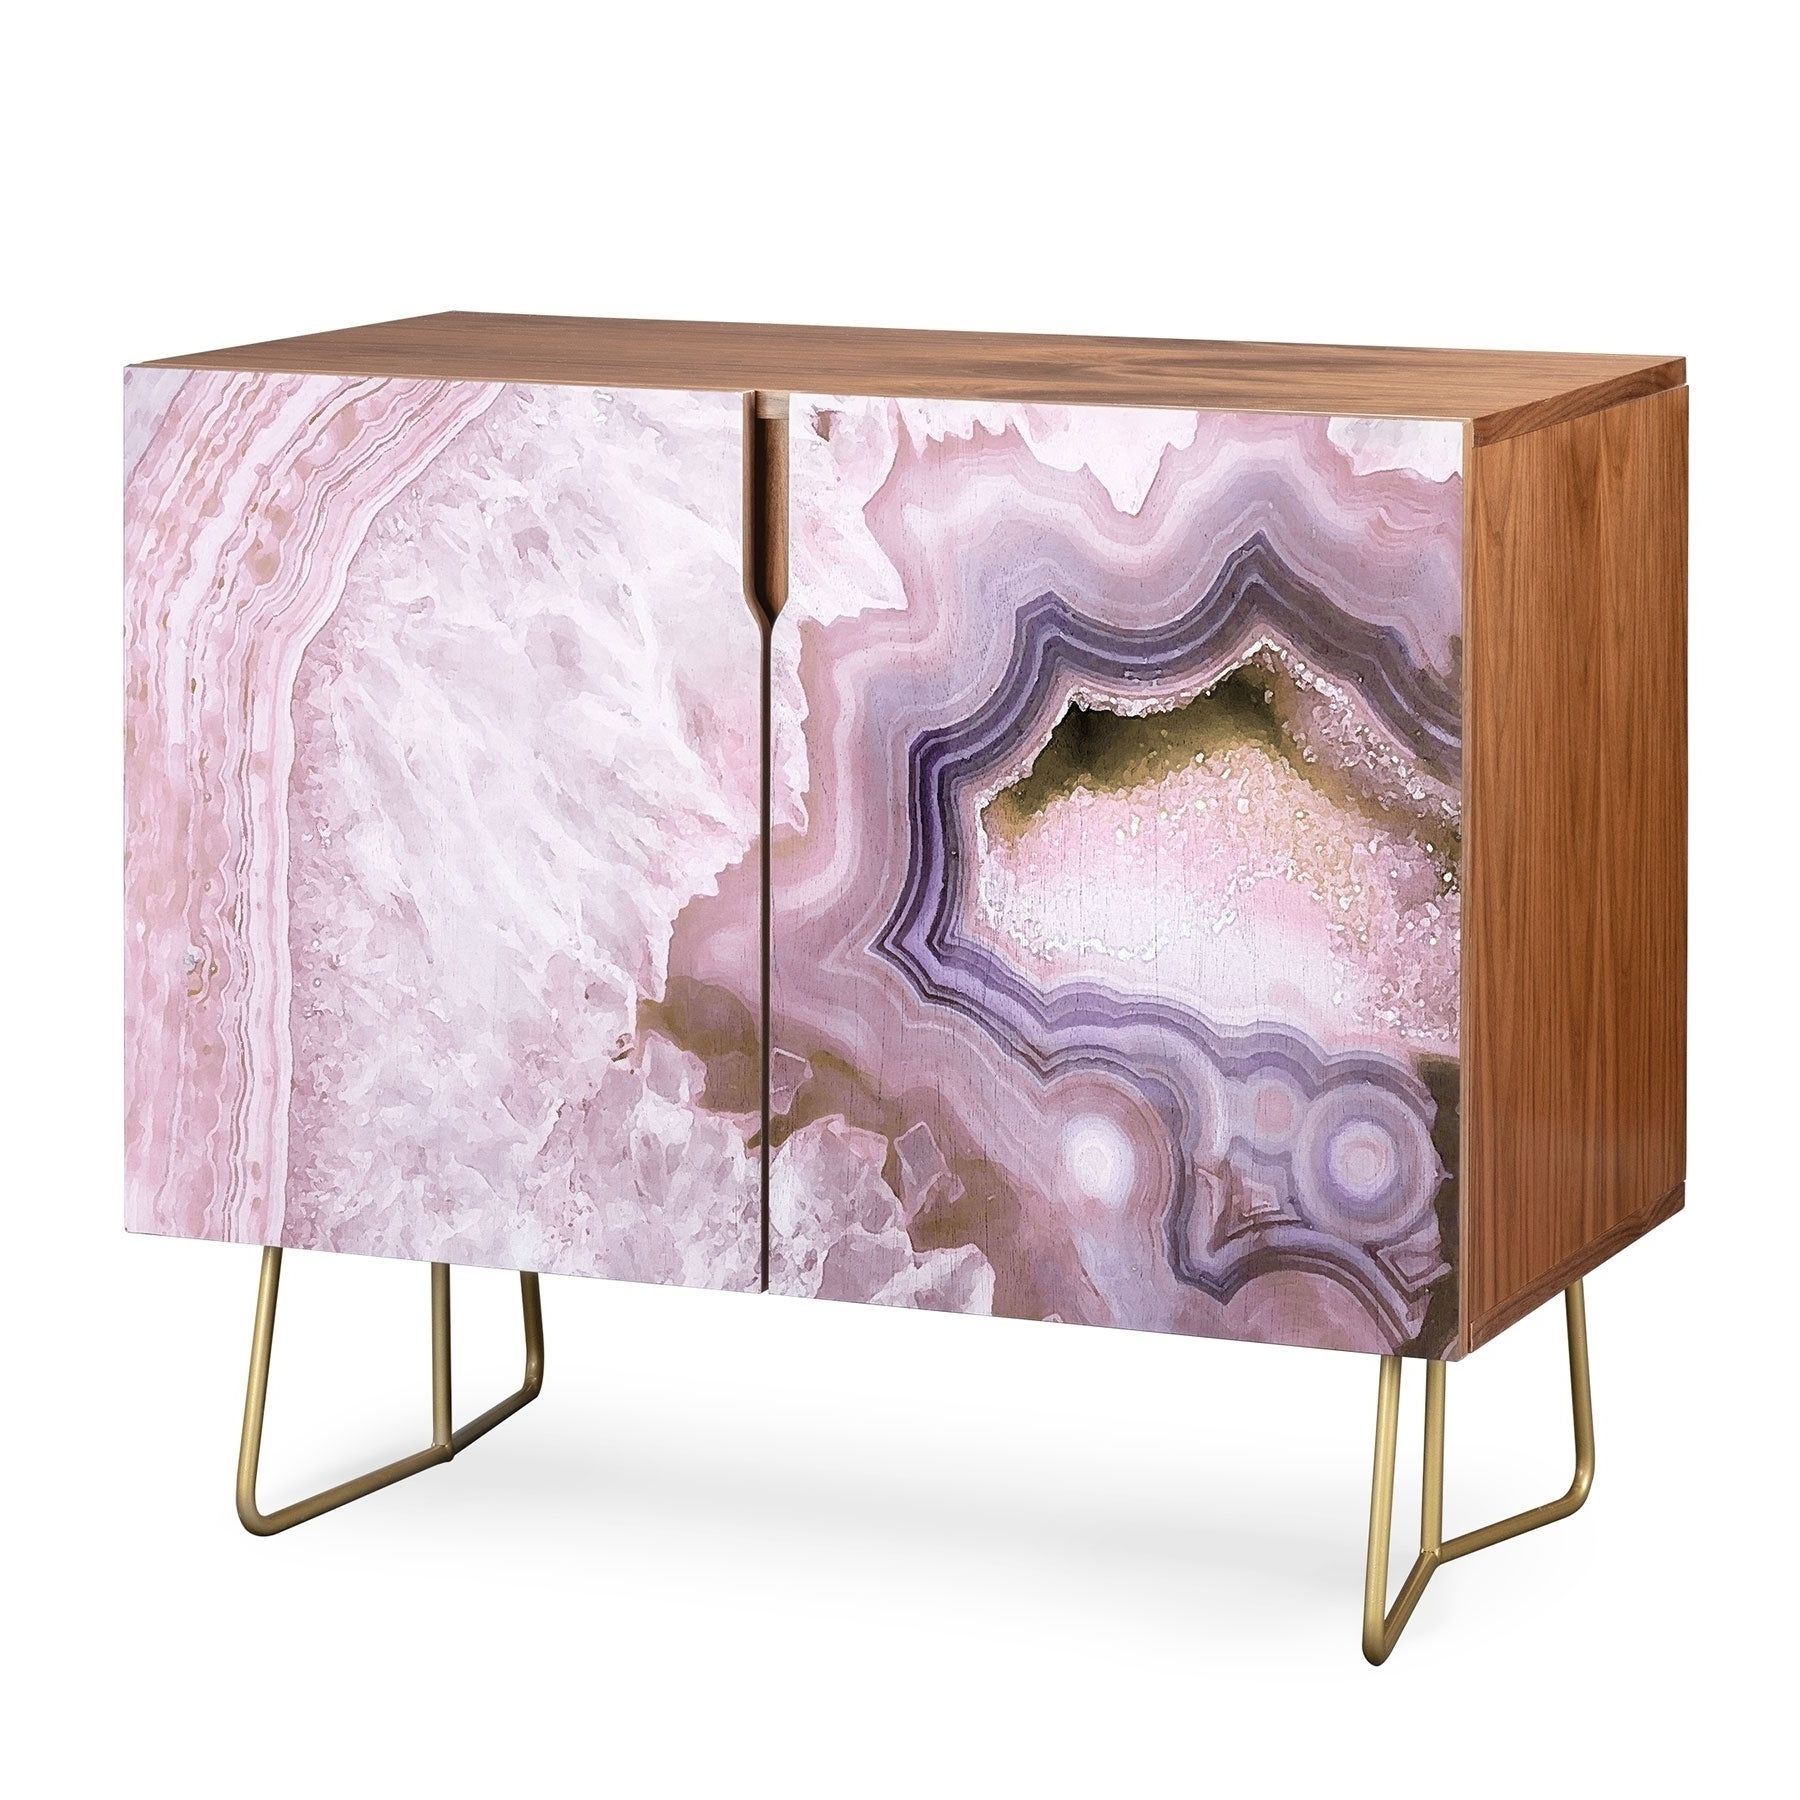 Deny Designs Pale Pink Agate Wood Credenza (3 Leg Options) Inside Pale Pink Agate Wood Credenzas (View 2 of 20)